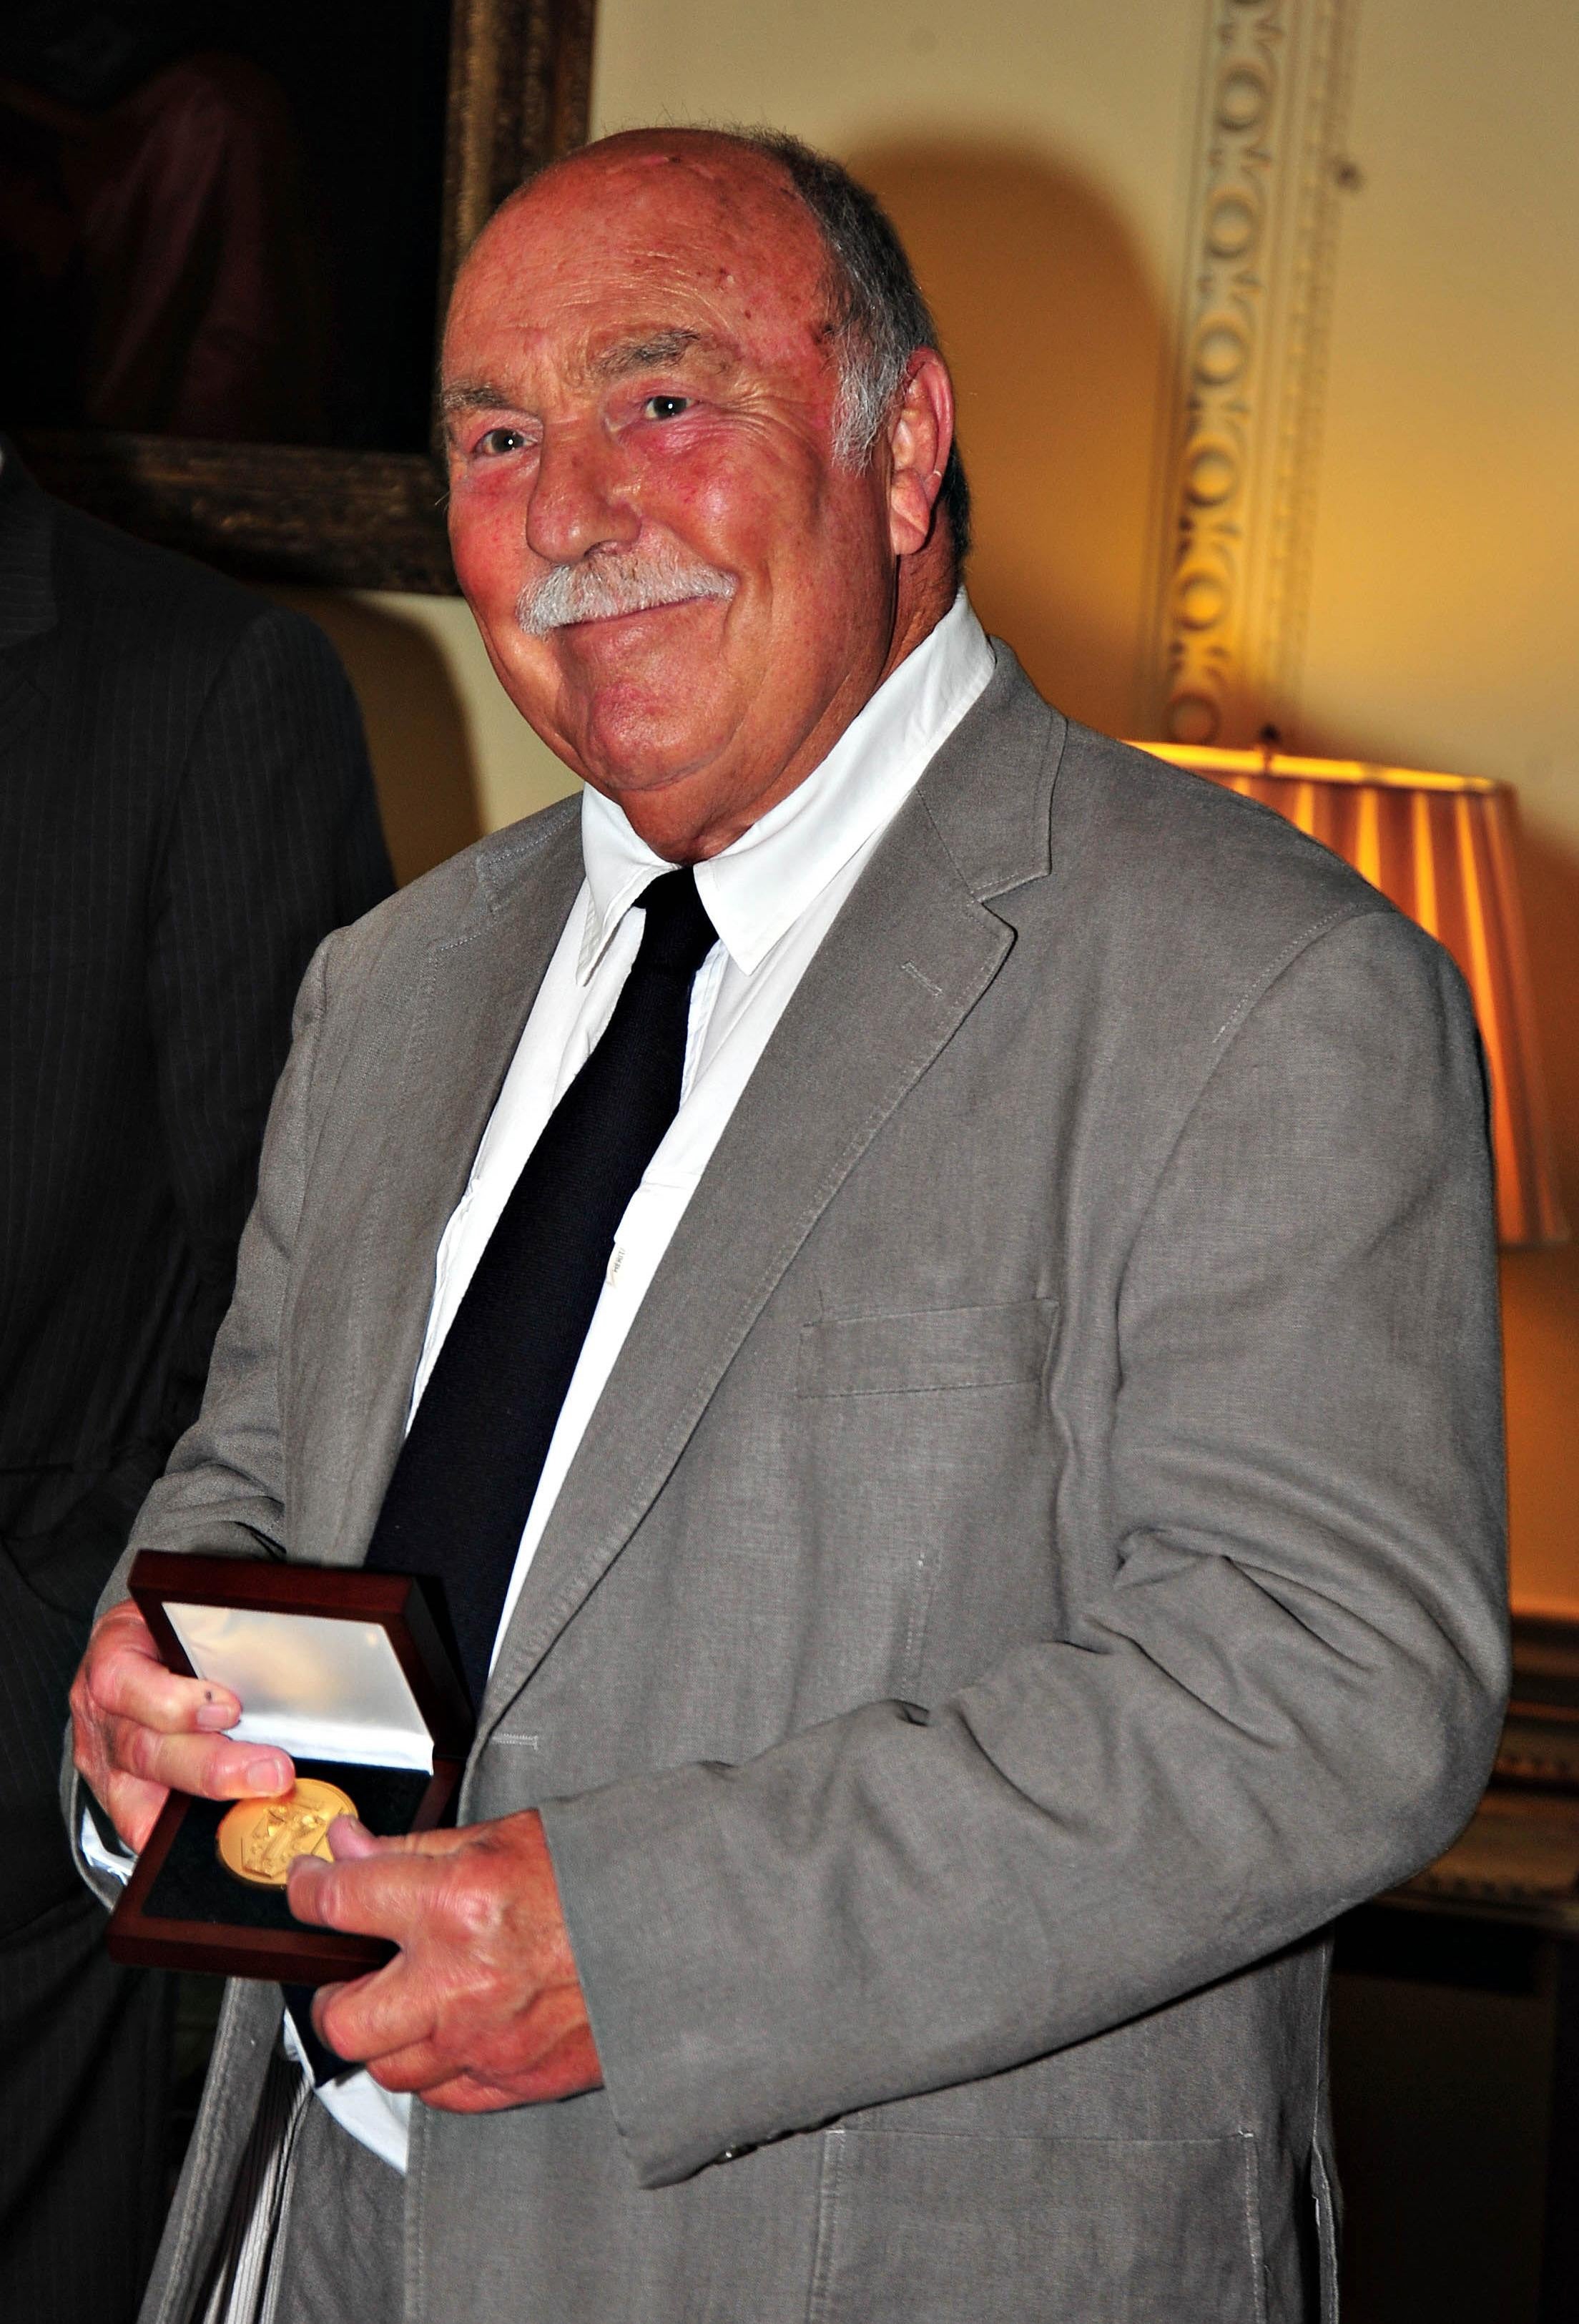 Jimmy Greaves was finally awarded with a winners’ medal from the 1966 World Cup in 2009 (John Ferguson/Daily Mirror)